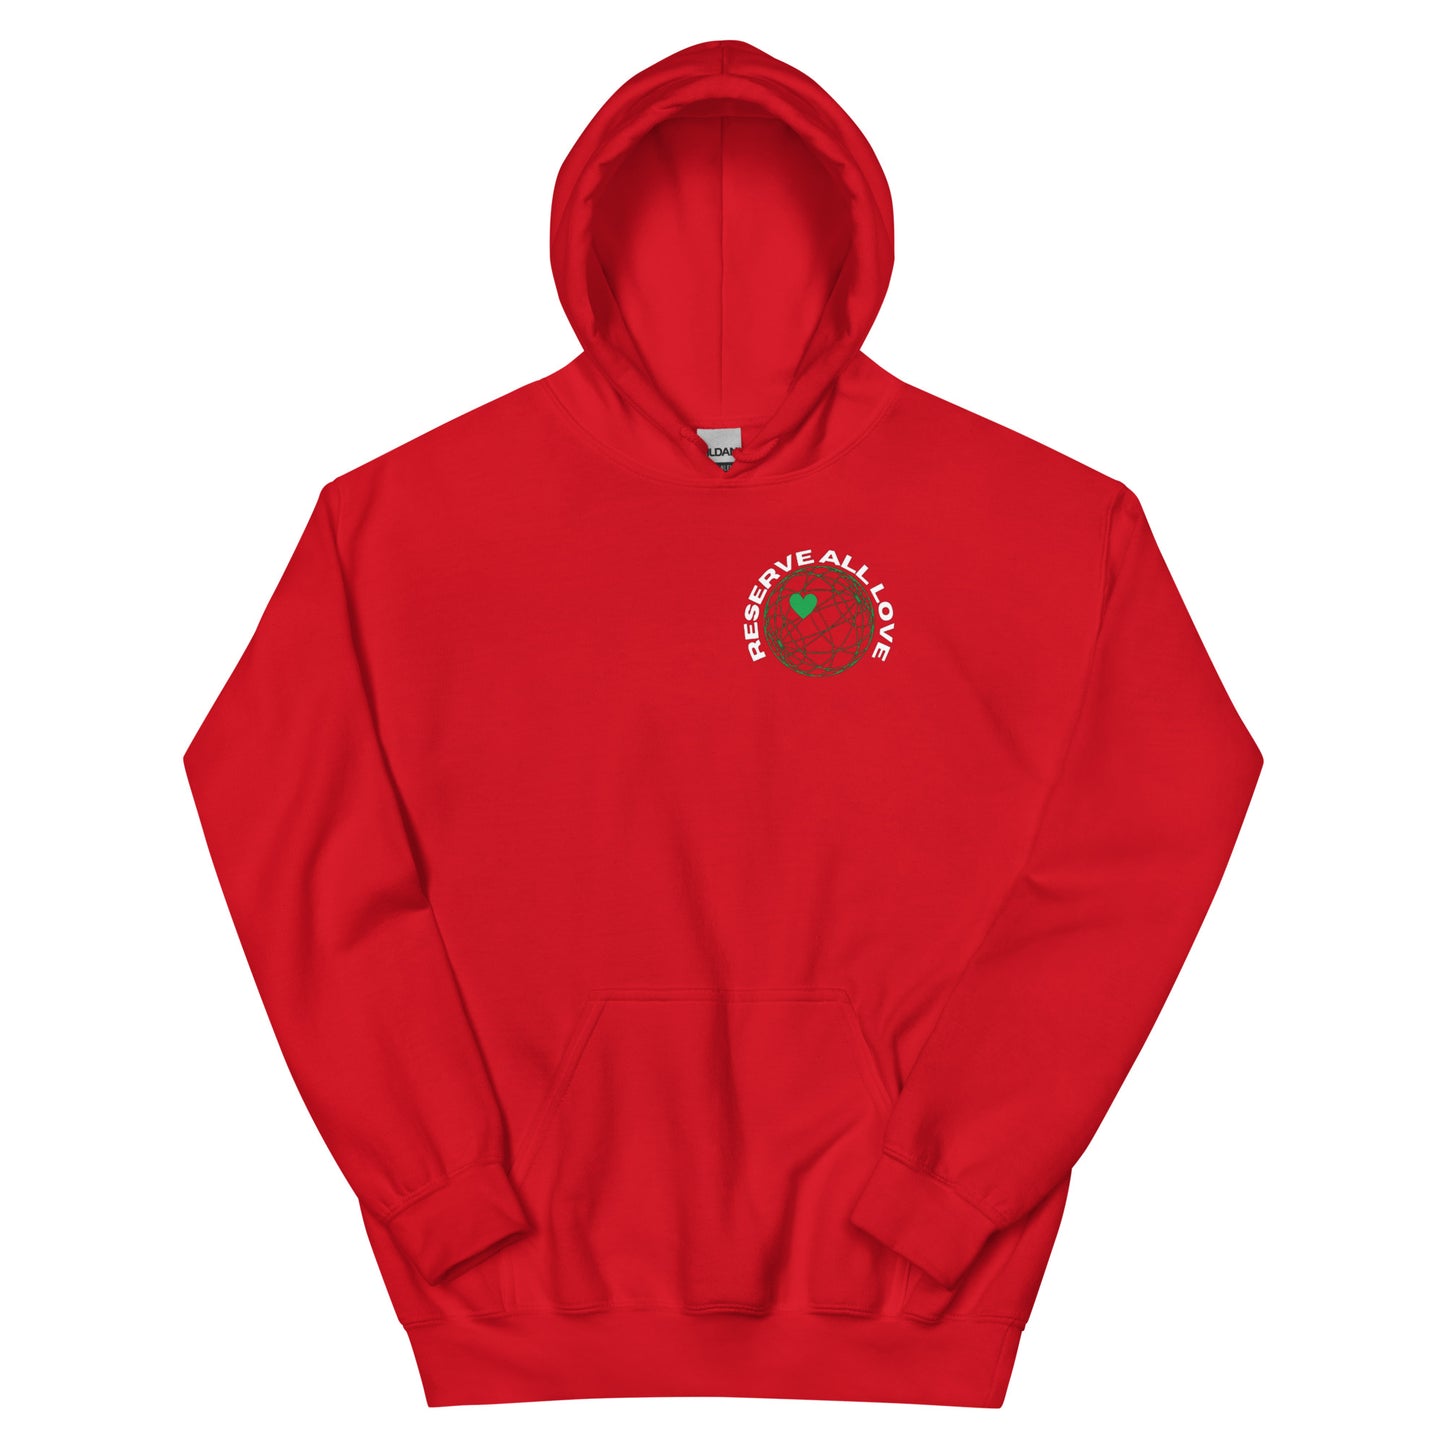 Reserve All Love Red and Green Hoodie